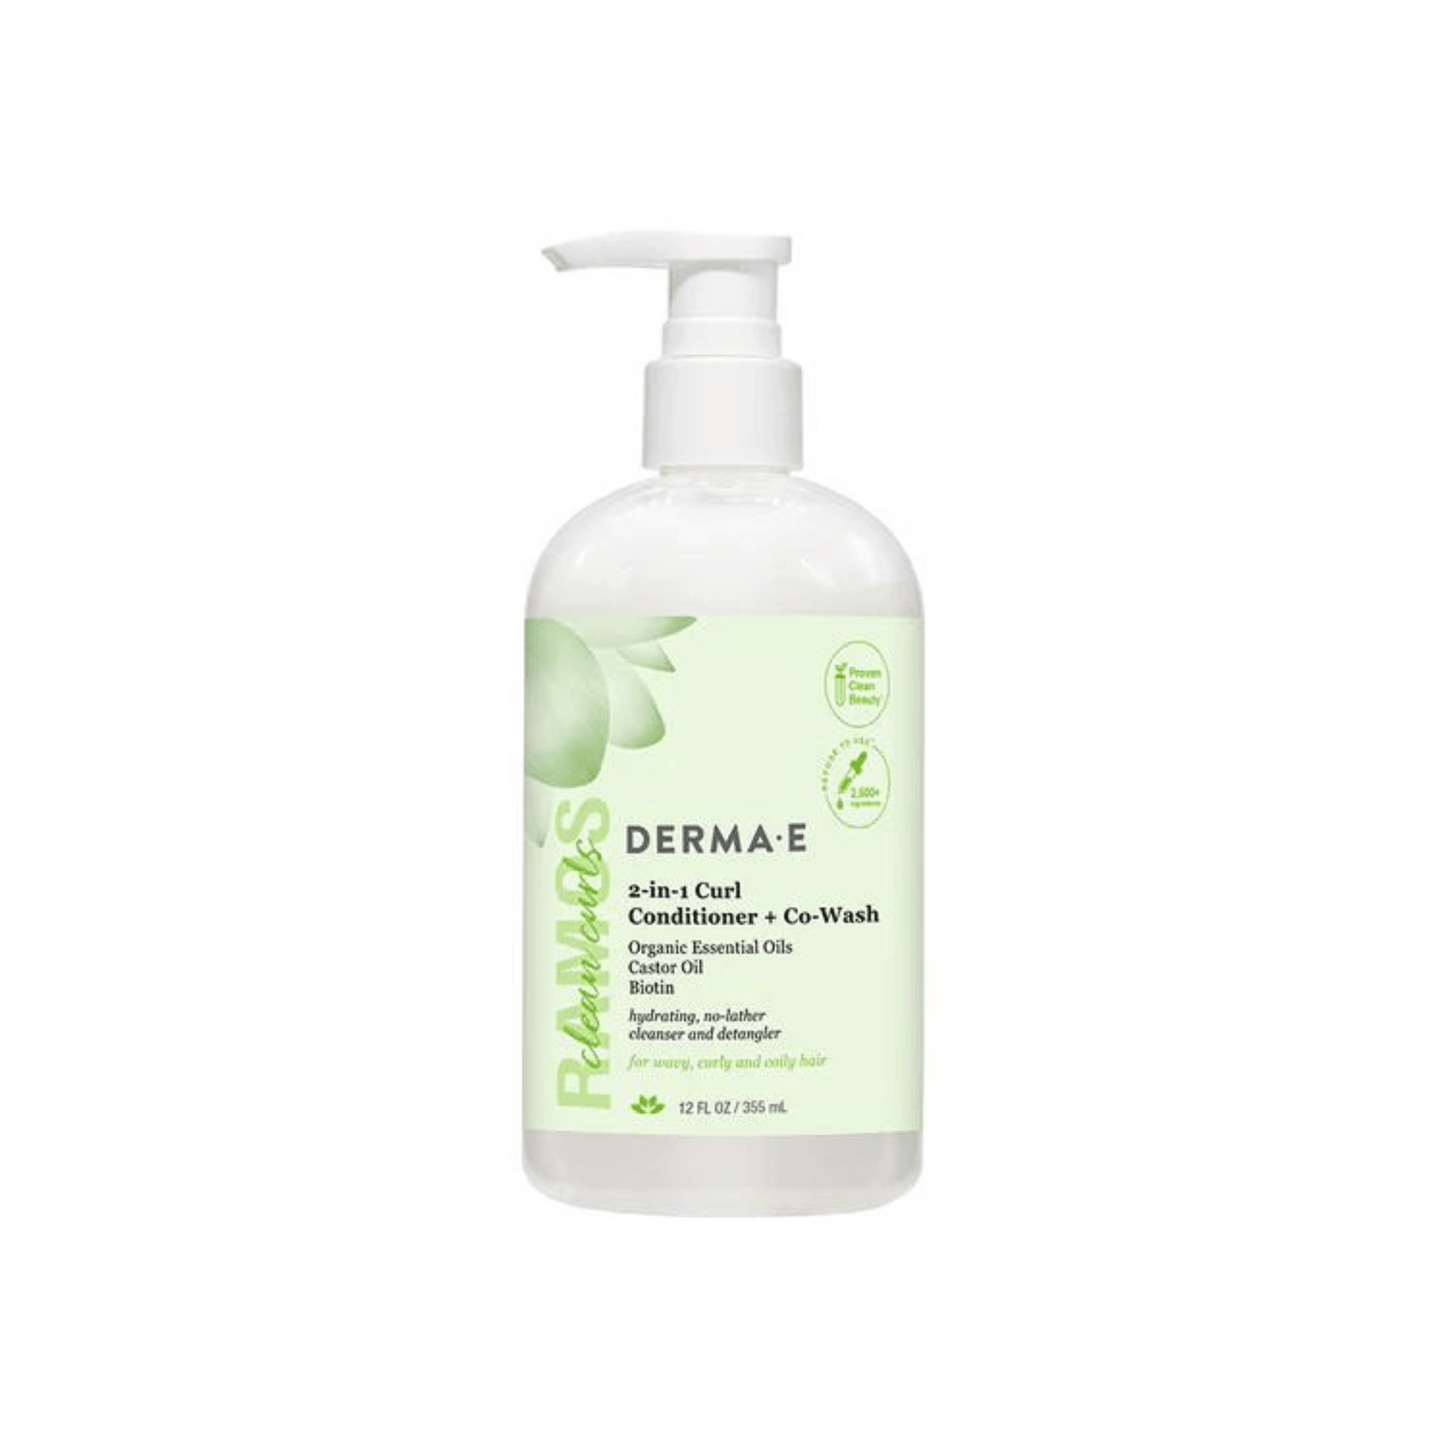 Primary Image of 2-in-1 Curl Conditioner + Co-Wash